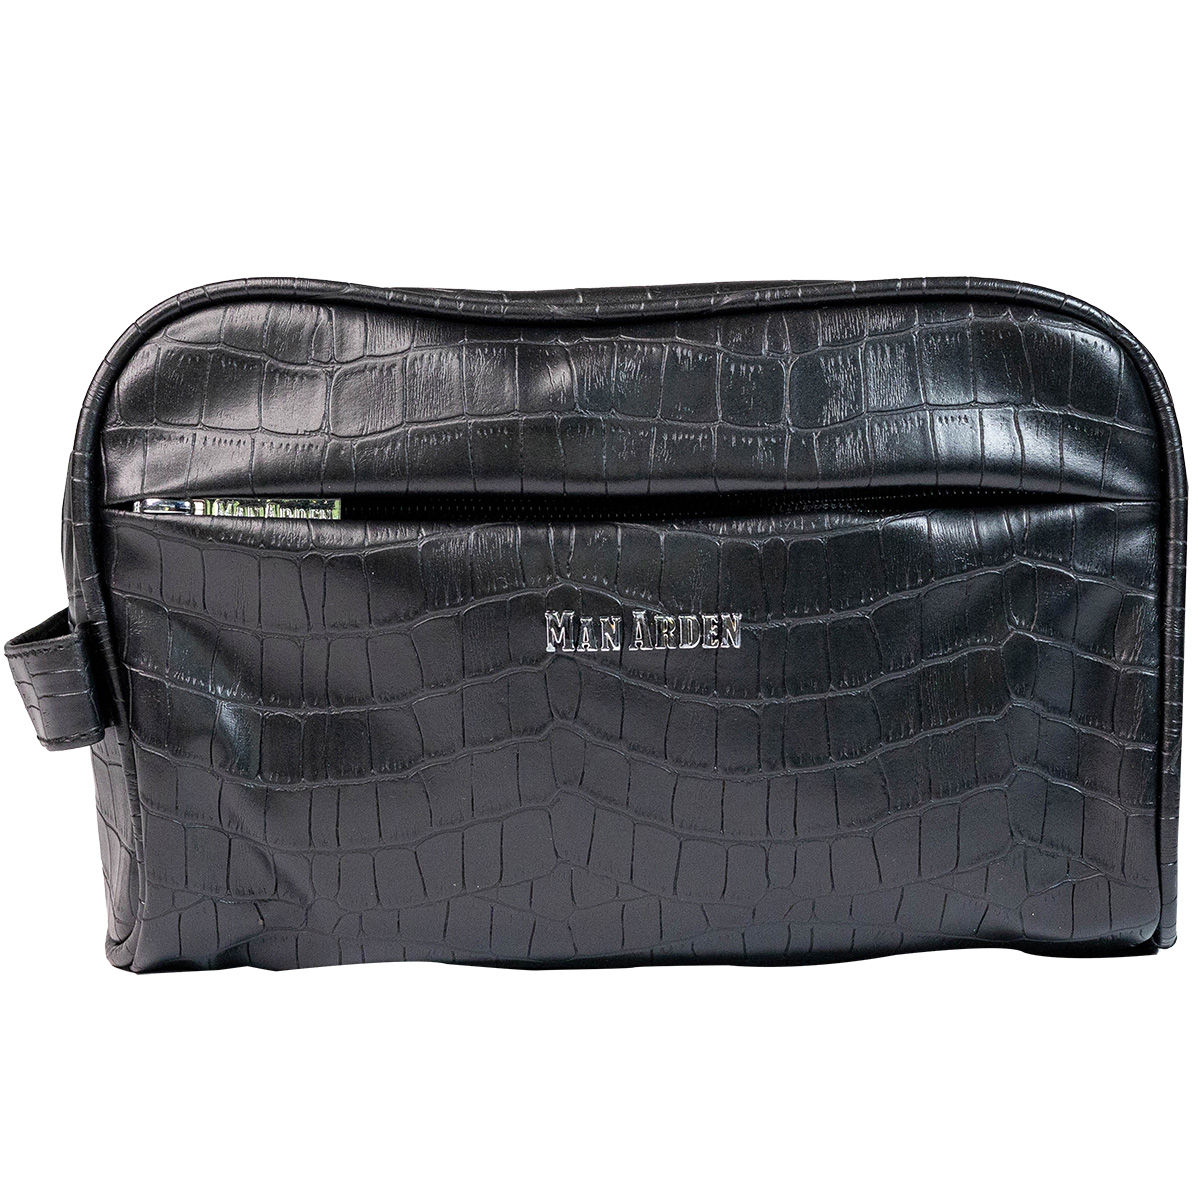 Leather Shaving Kit Bag at Best Price in Udaipur  Leather Articles